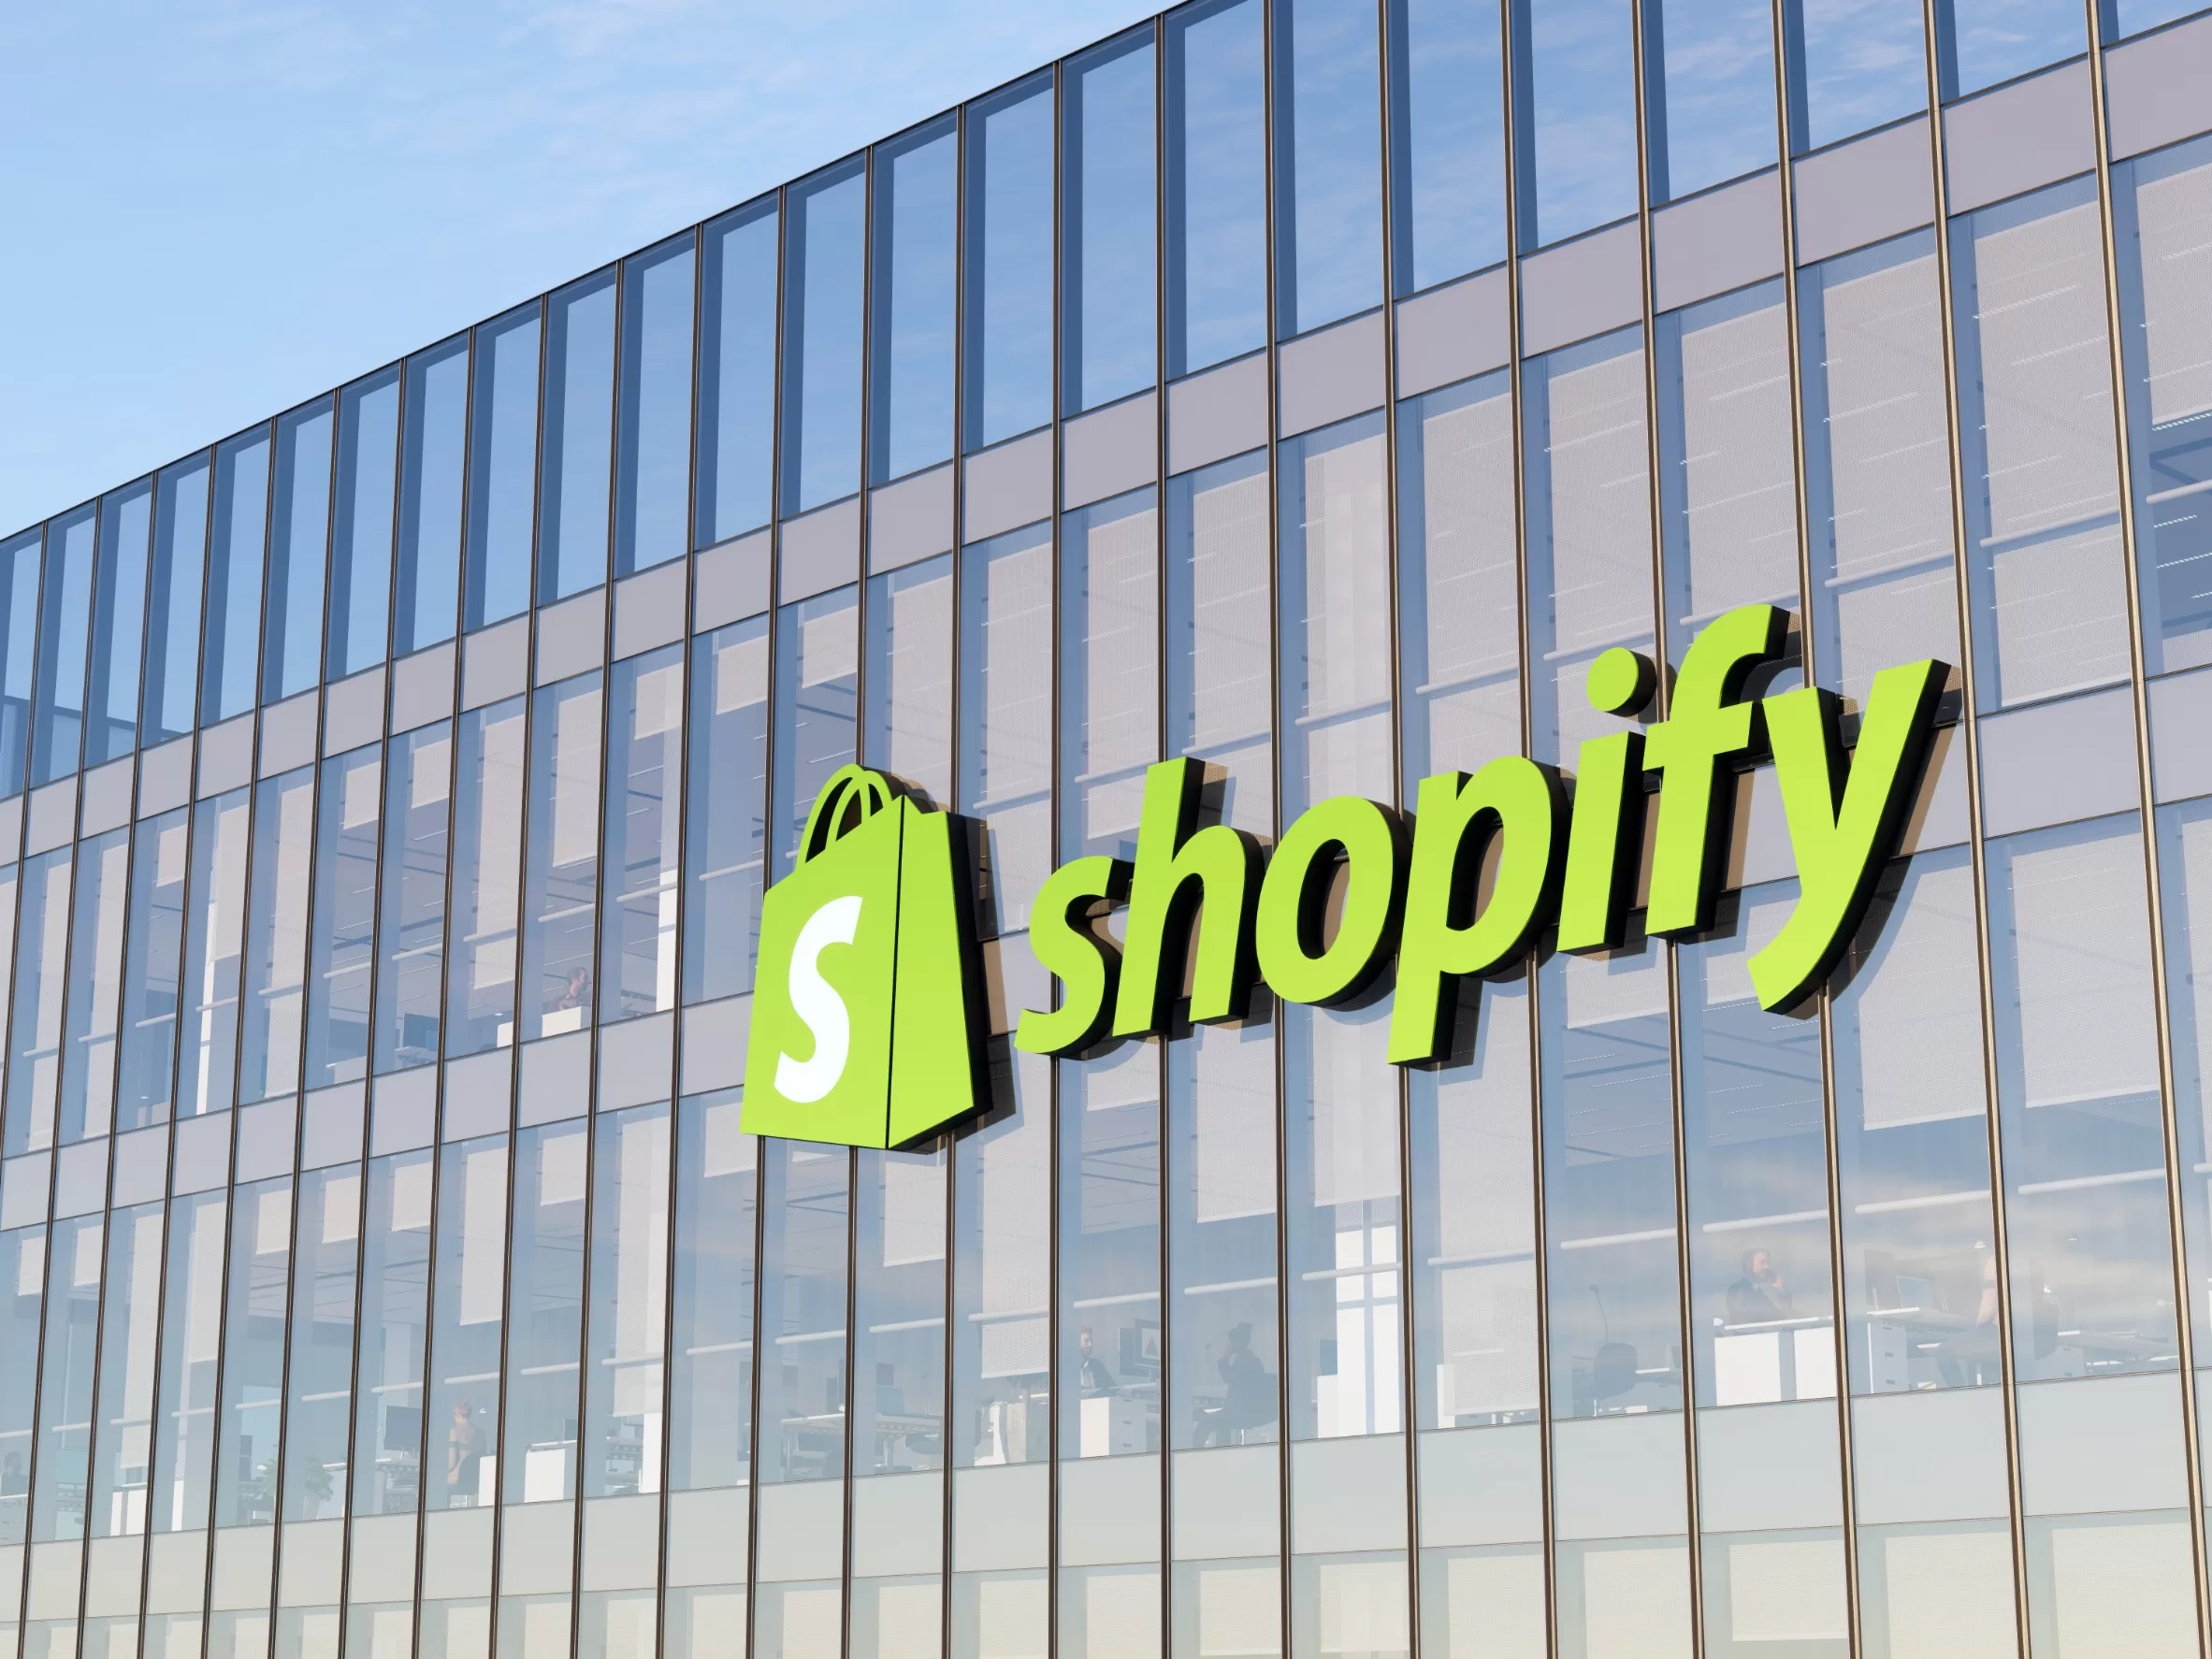 Shopify Stock: Riding the Wave of E-Commerce Expansion